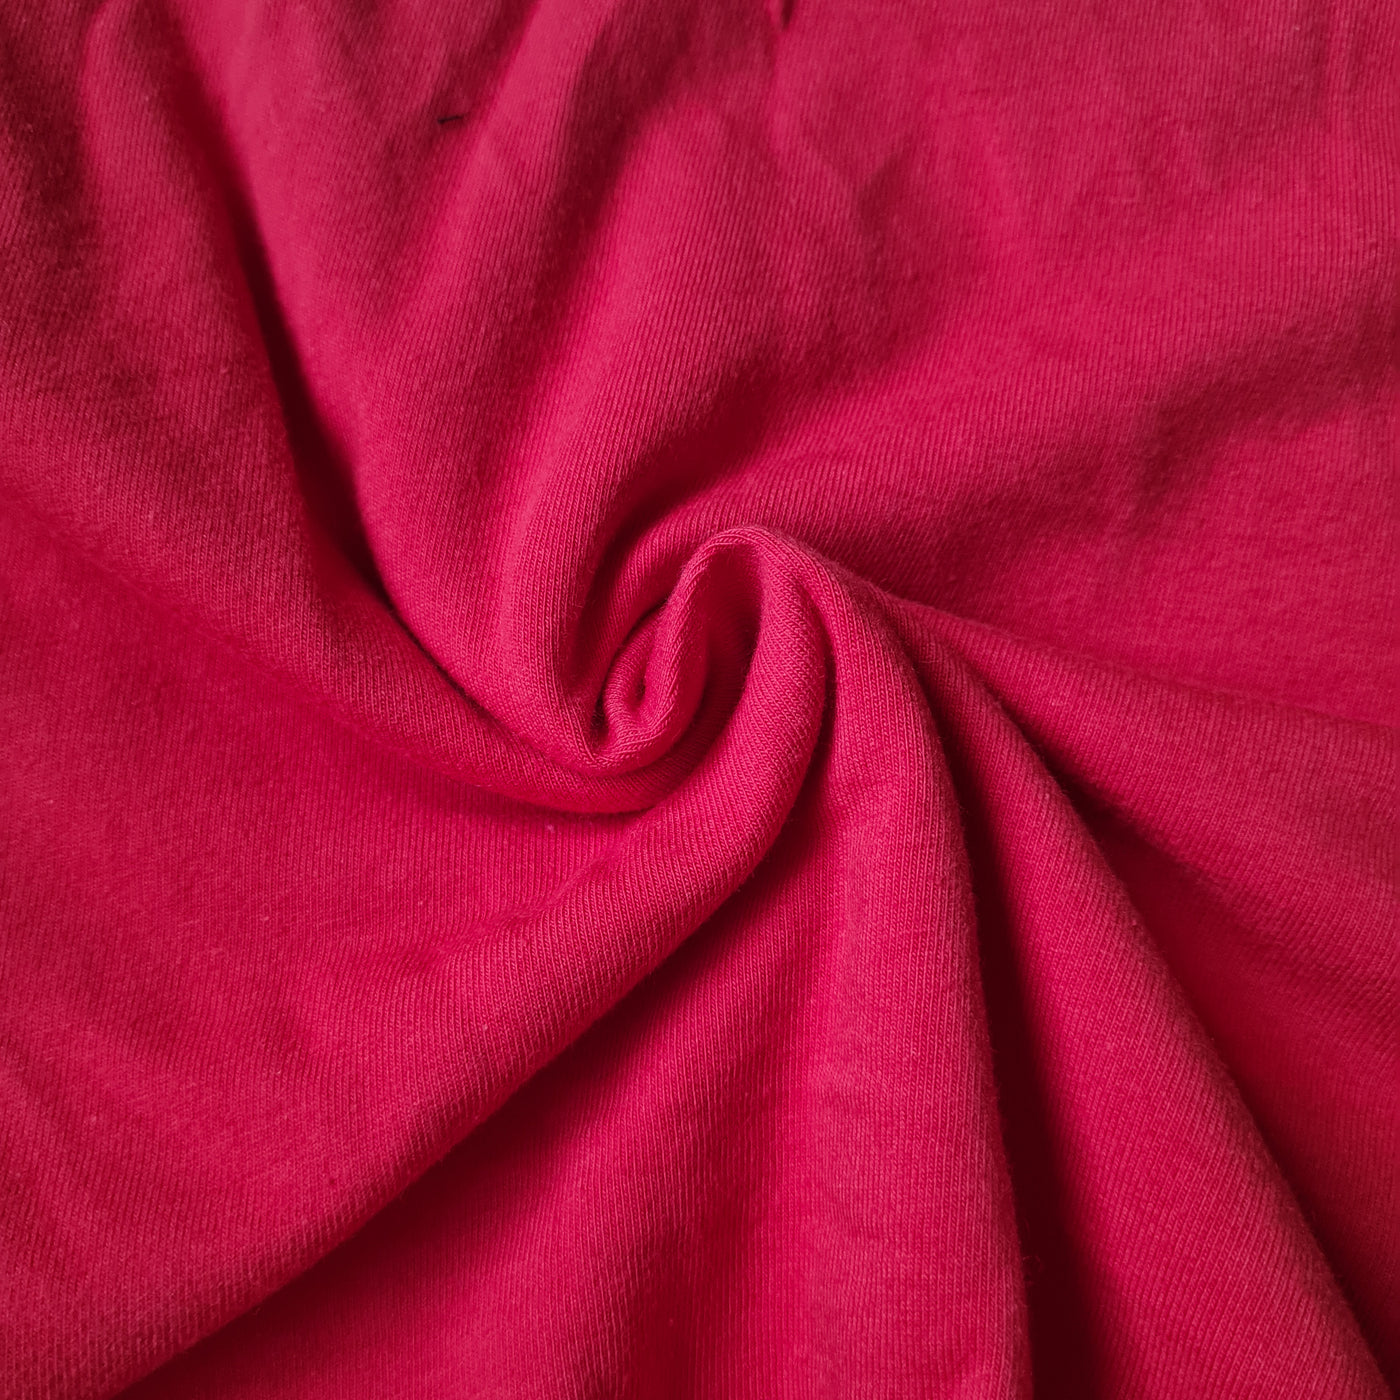 Solid Plain Cotton Spandex 4 way stretch Jersey Knit Fabric. Cut to order per 1/2 m